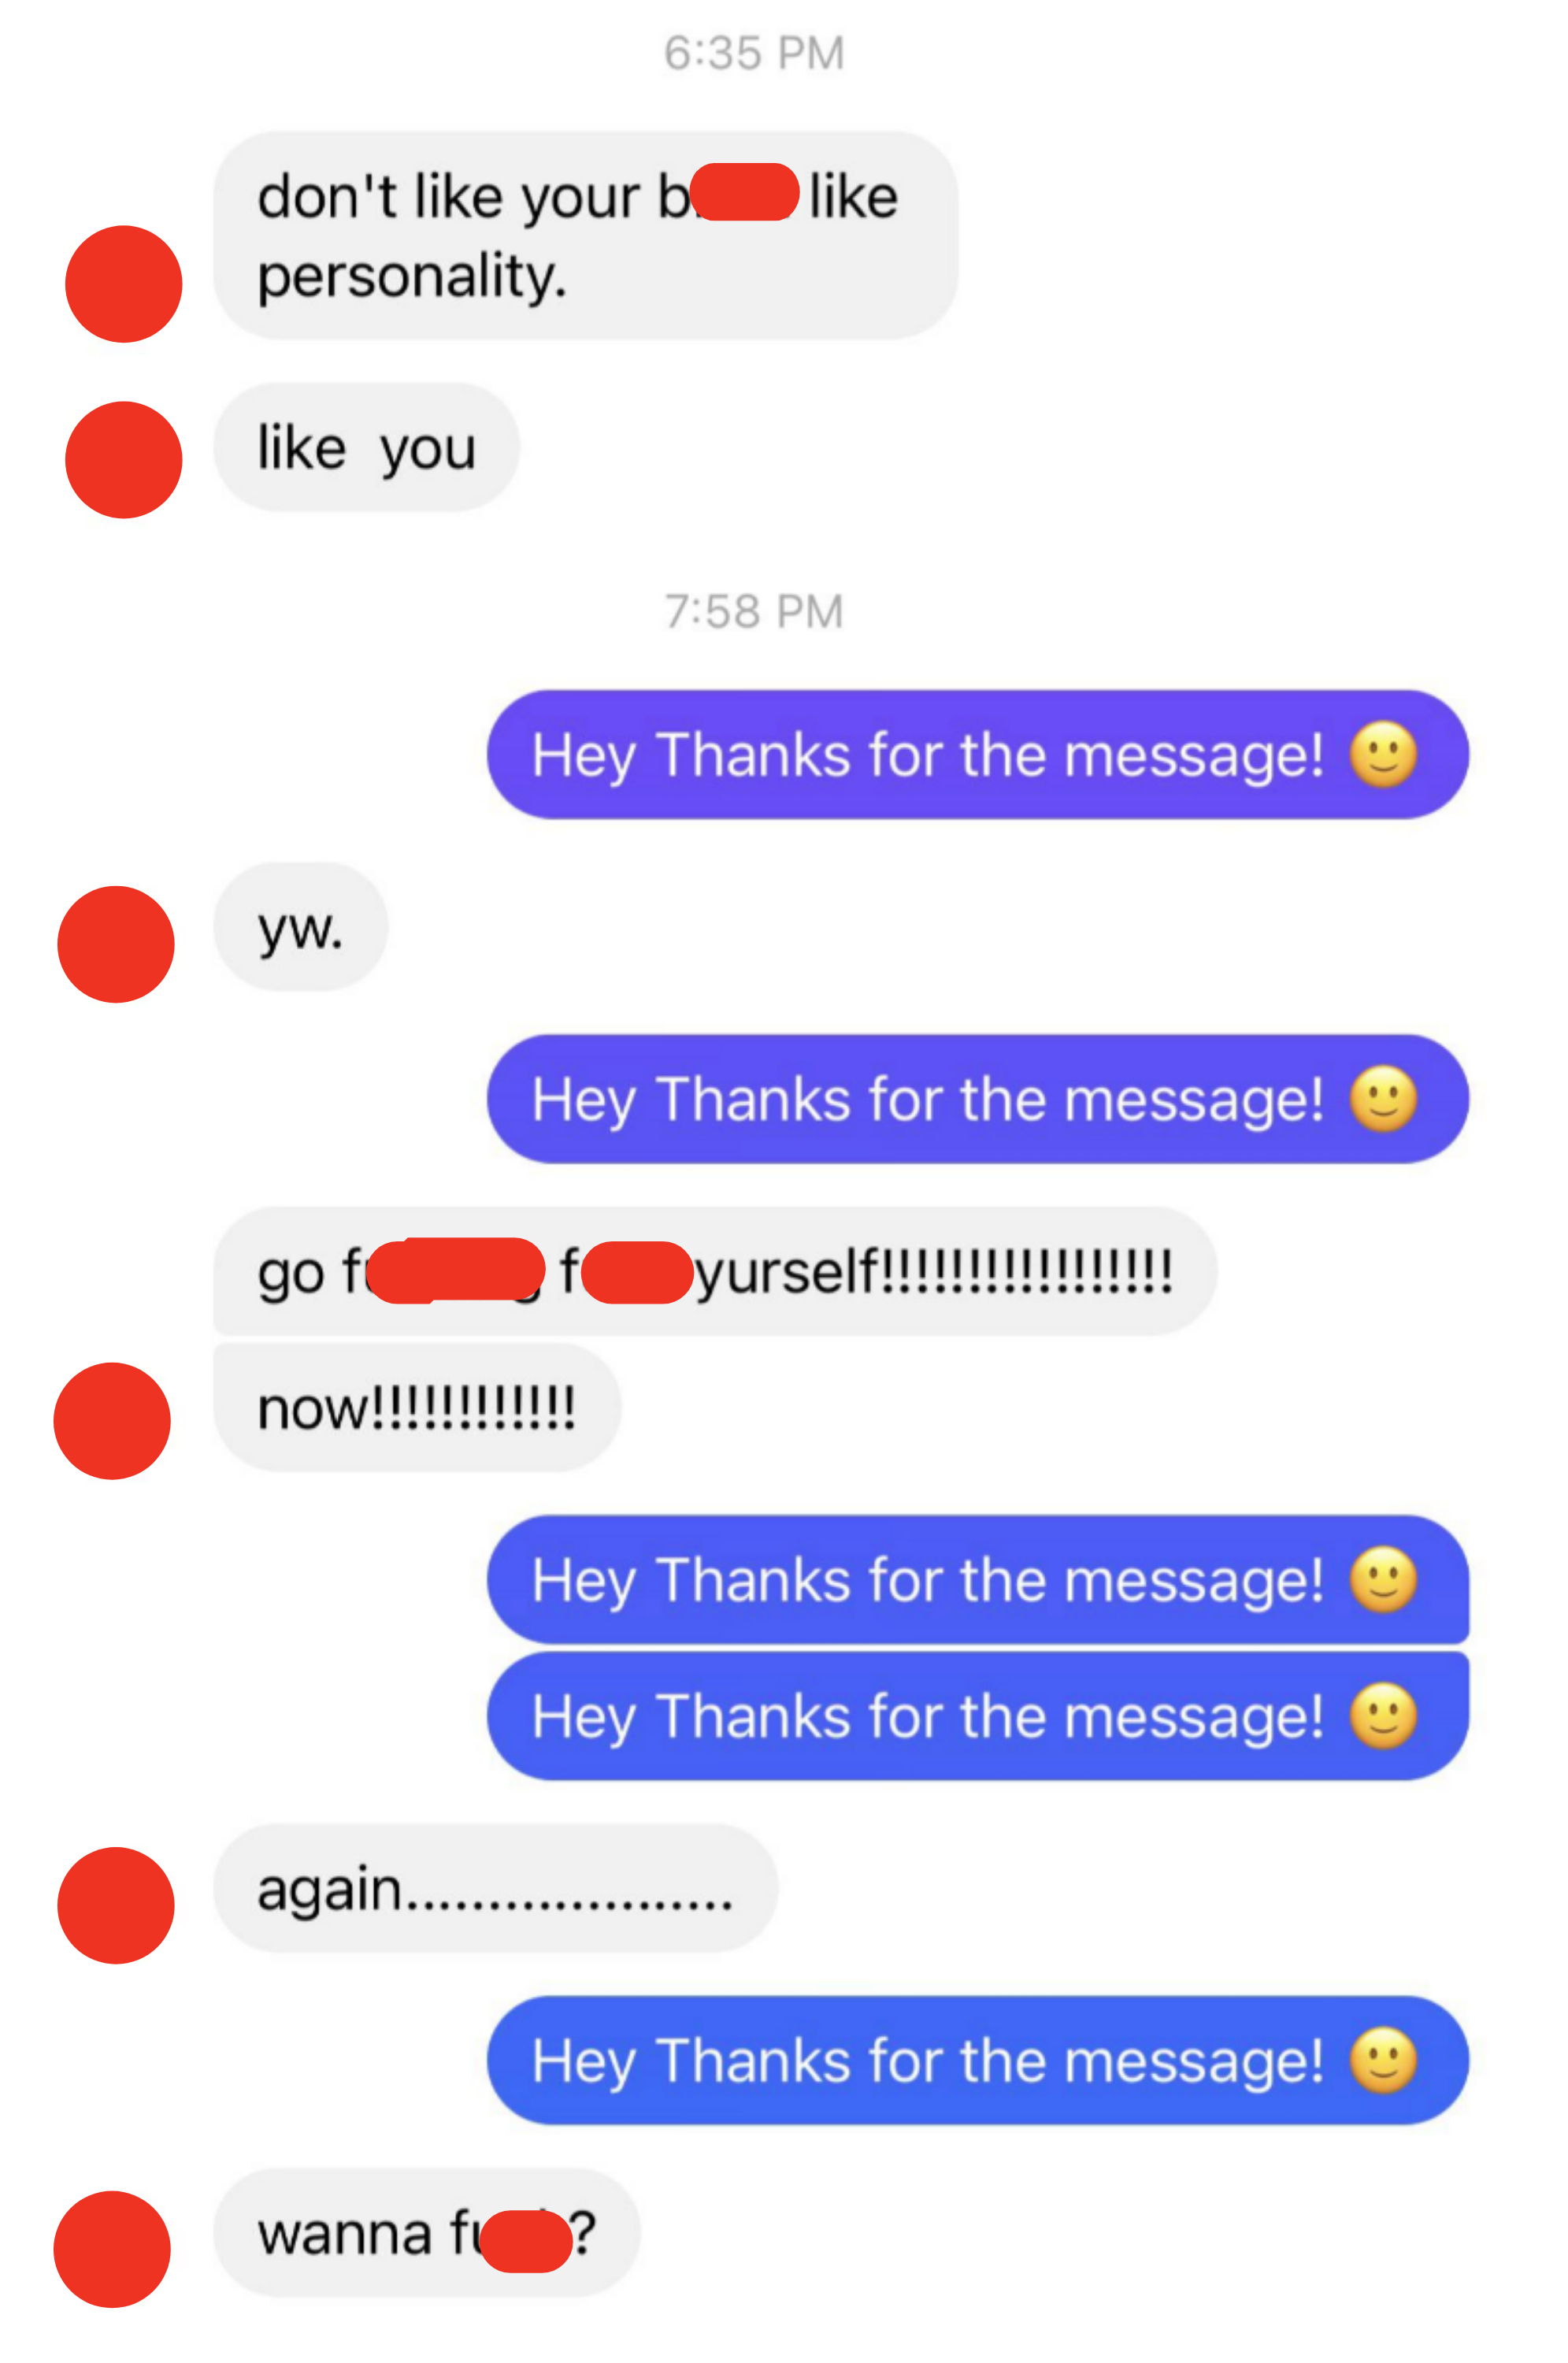 A rude message prompts someone to set an auto response that says &quot;hey, thanks for the message,&quot; and the rude texter keeps responding to it with increasing frustration